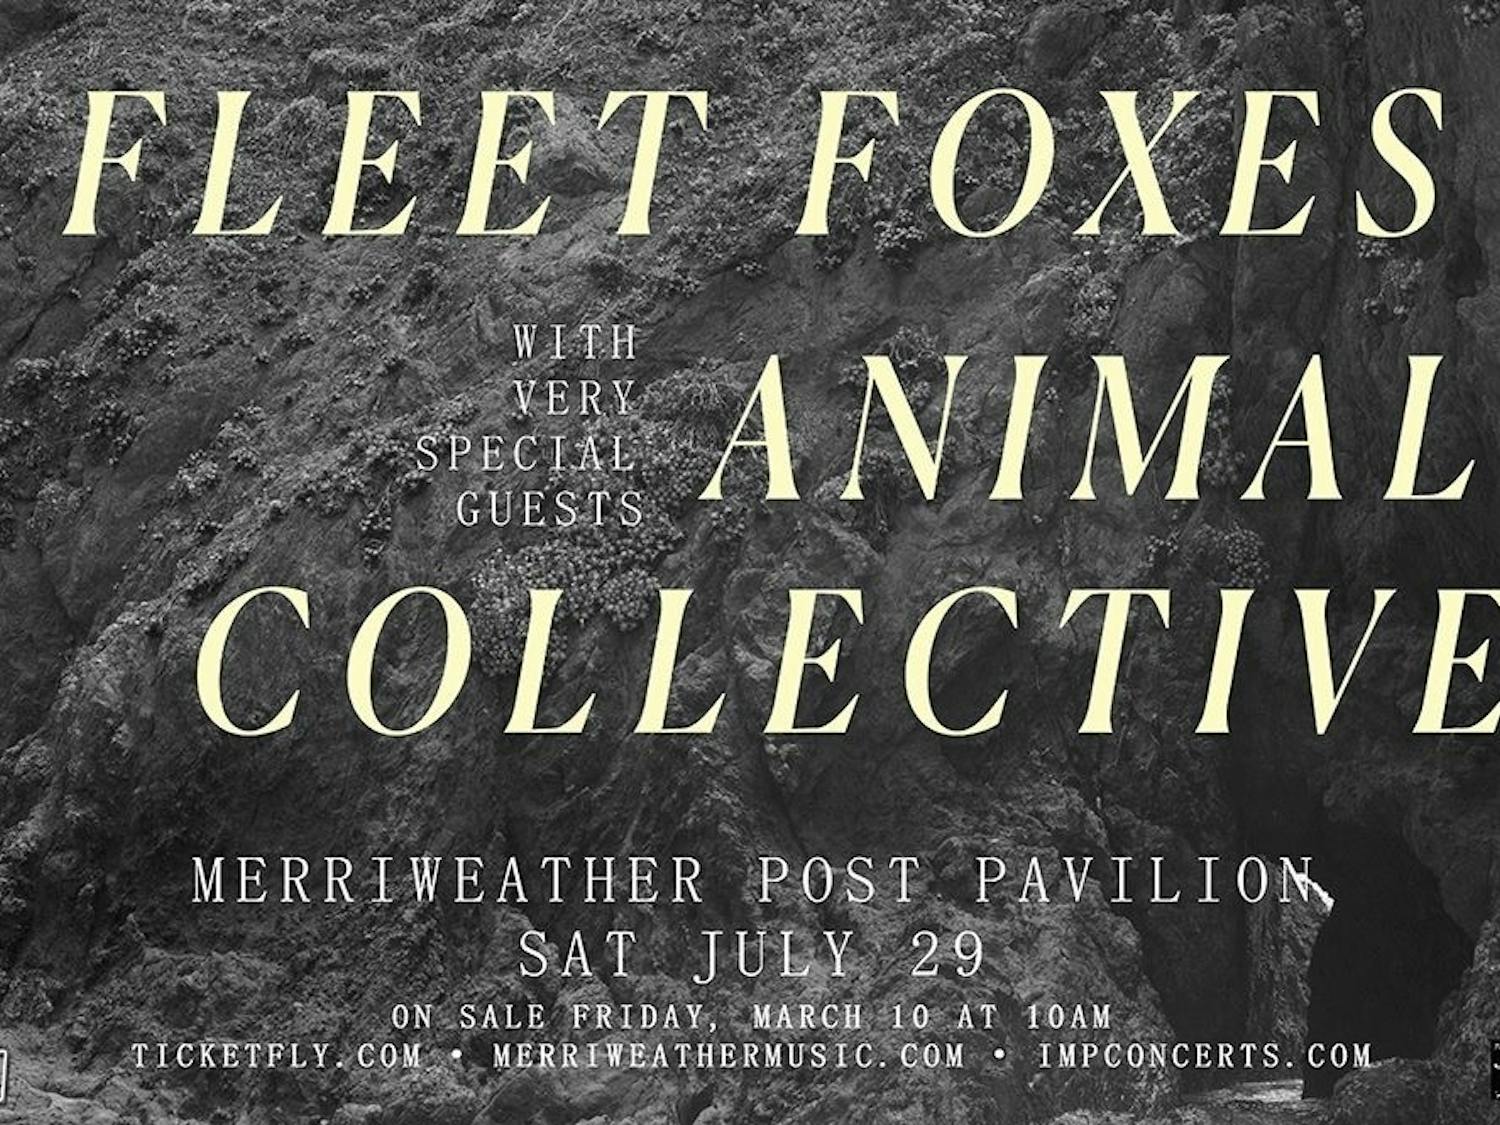 Fleet Foxes with Animal Collective